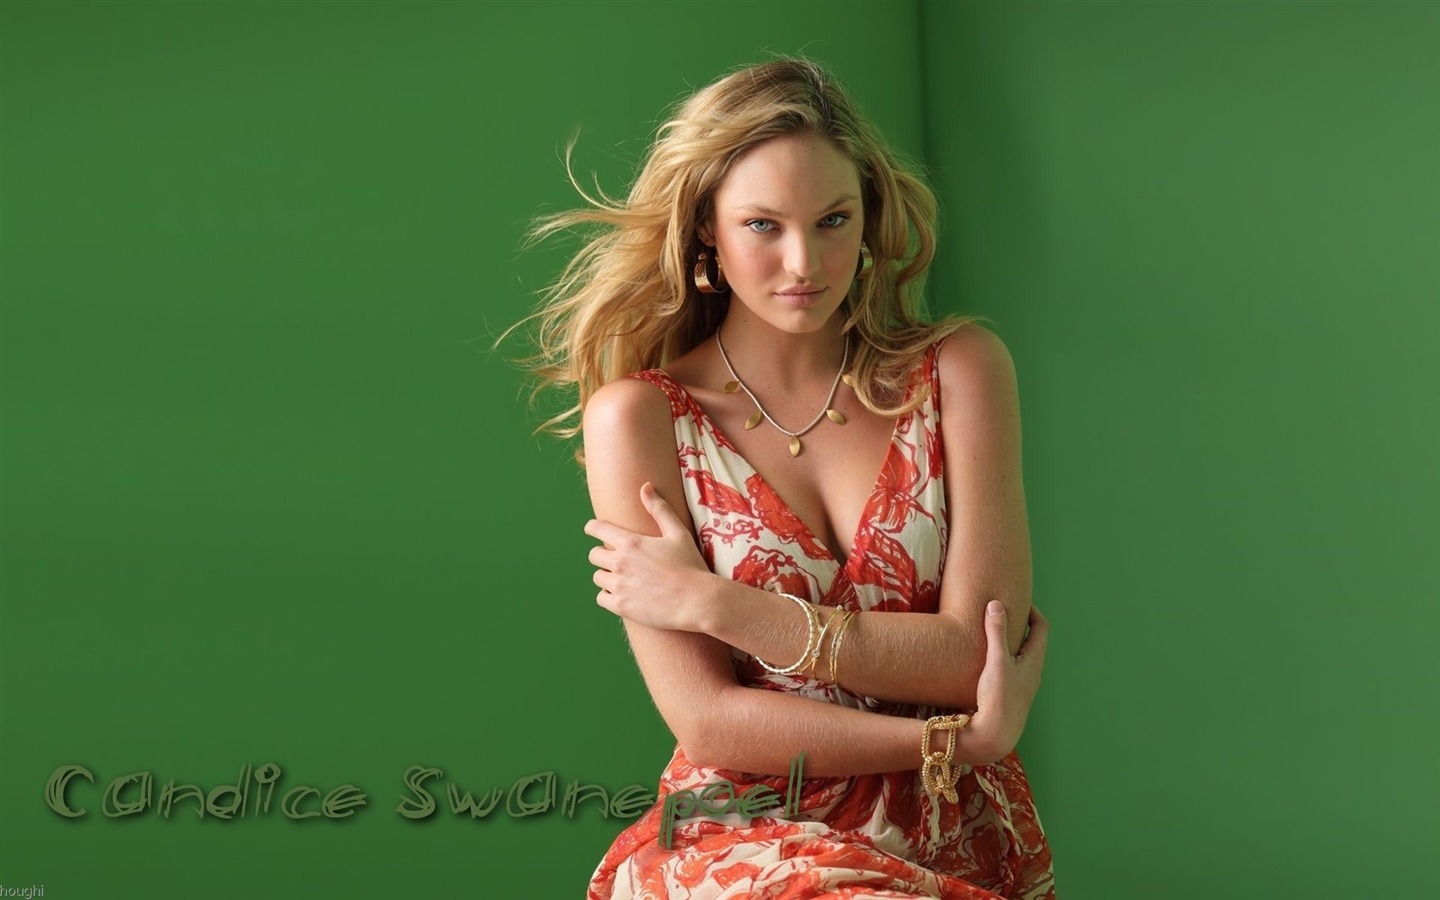 Candice Swanepoel #016 - 1440x900 Wallpapers Pictures Photos Images